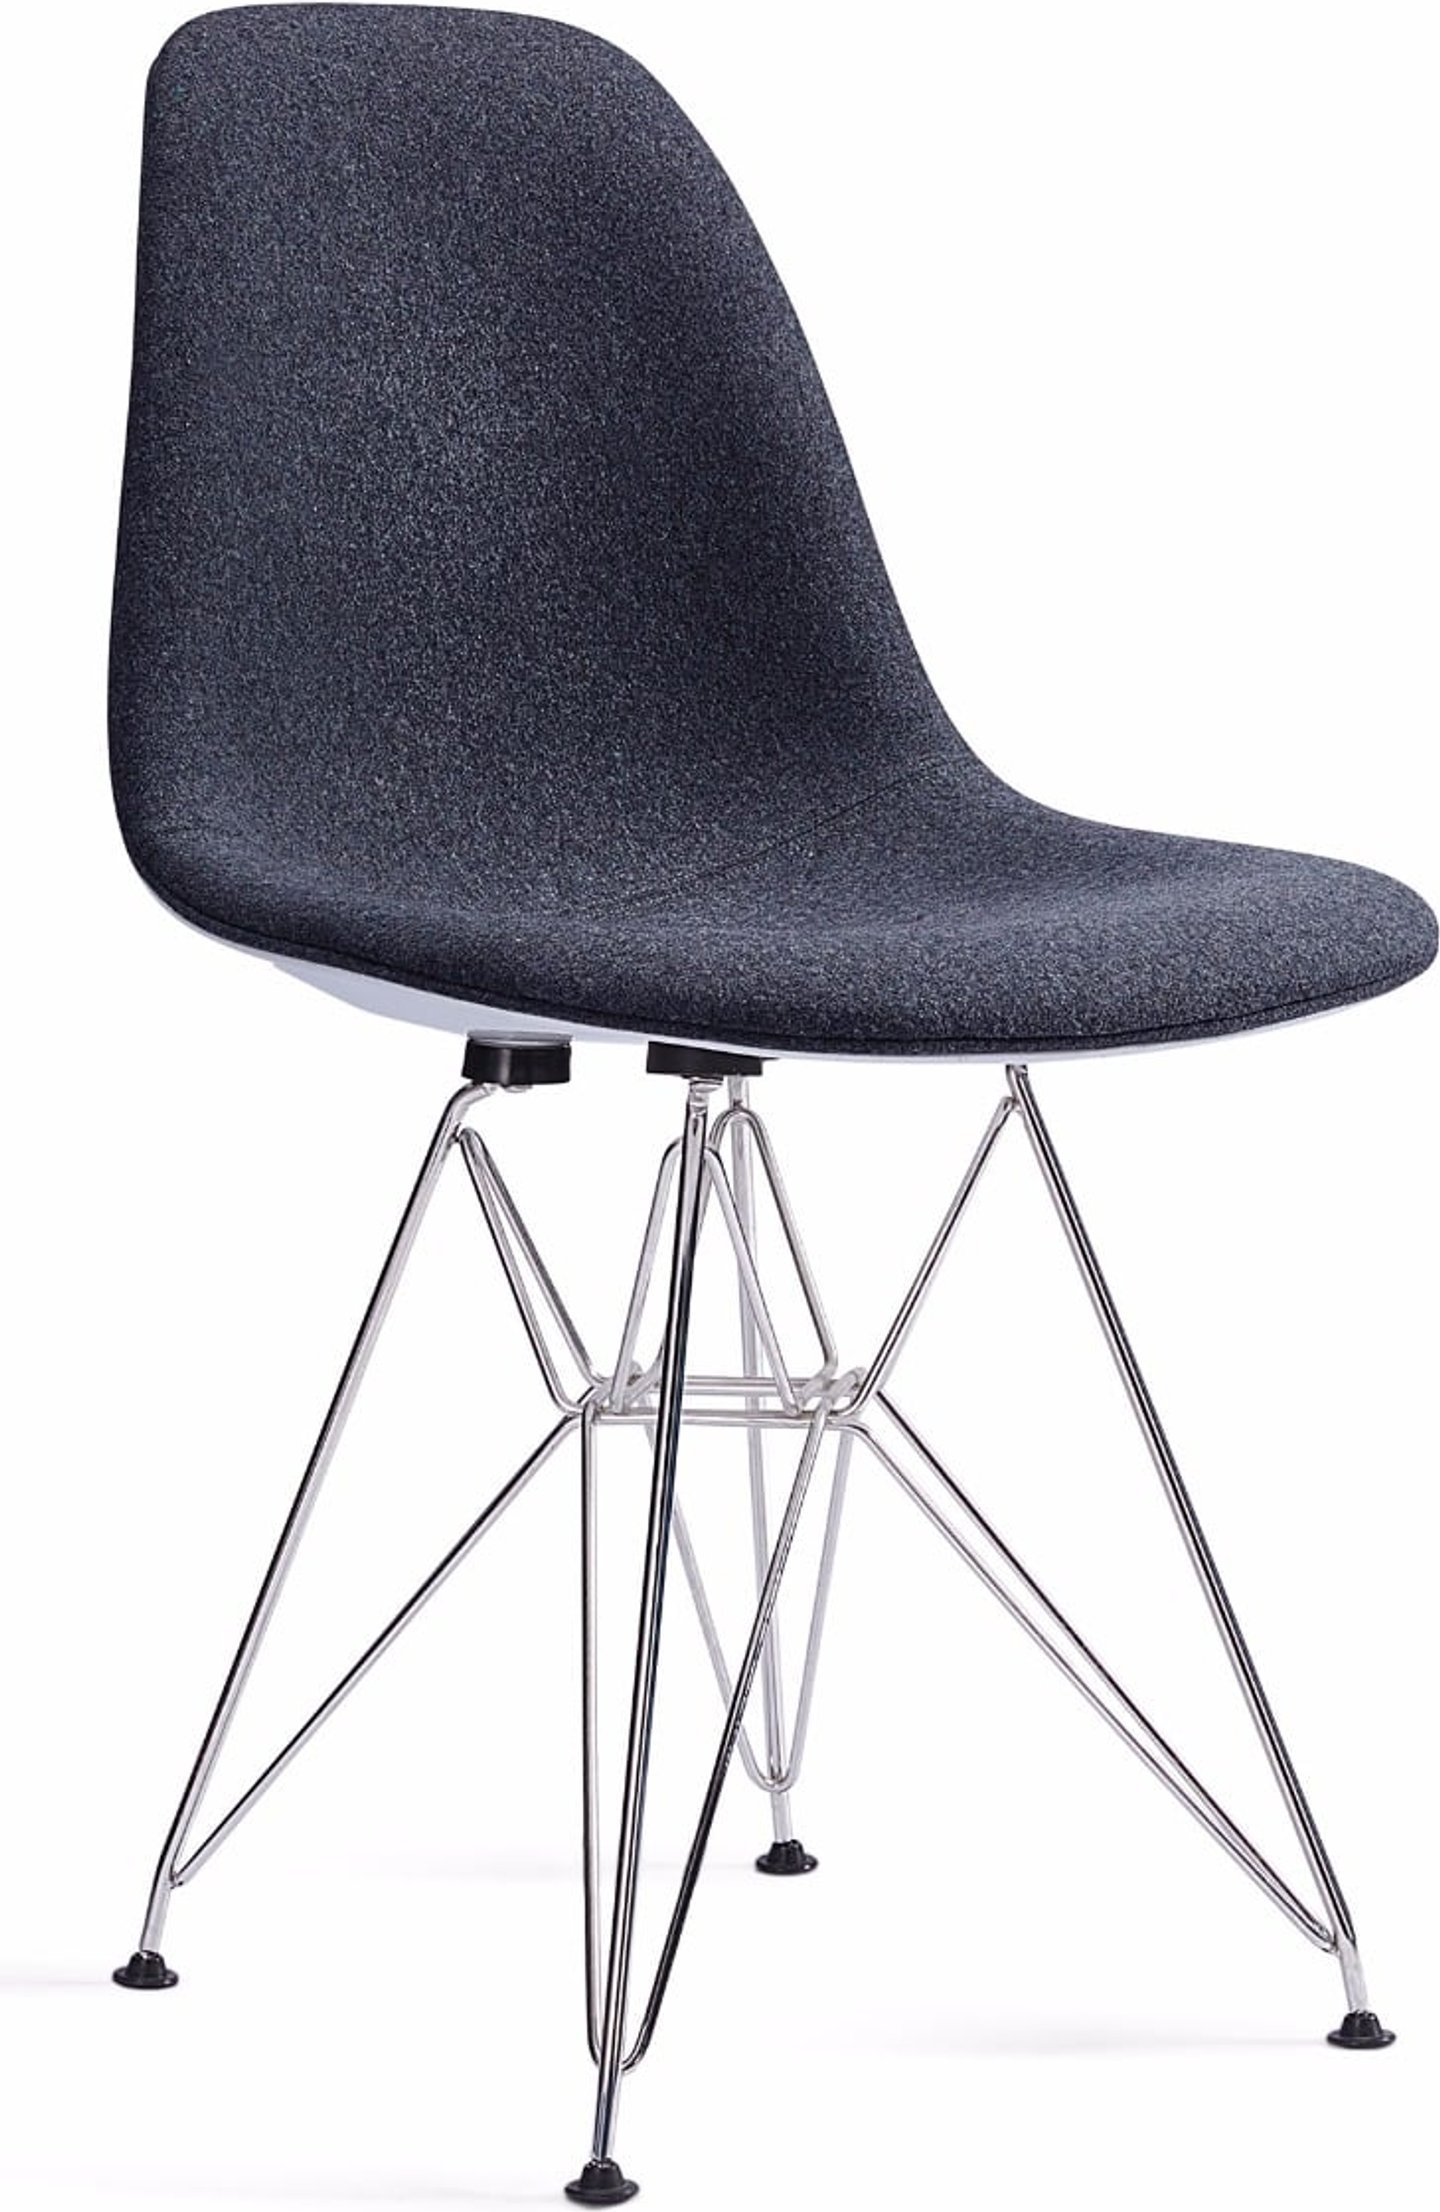 DSR Style Upholstered Dining Chair Charcoal Grey image.